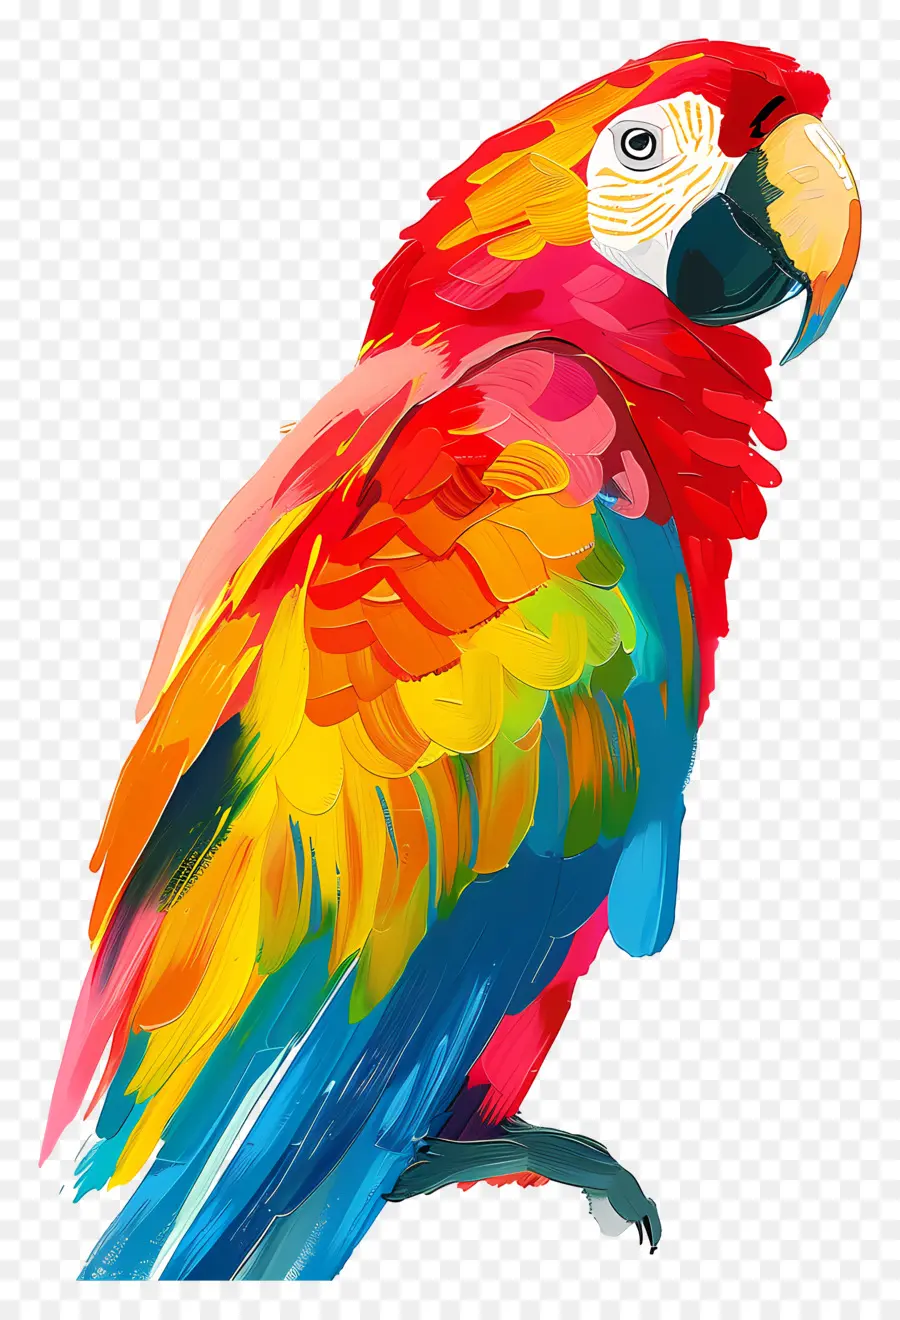 Loro，Aves PNG